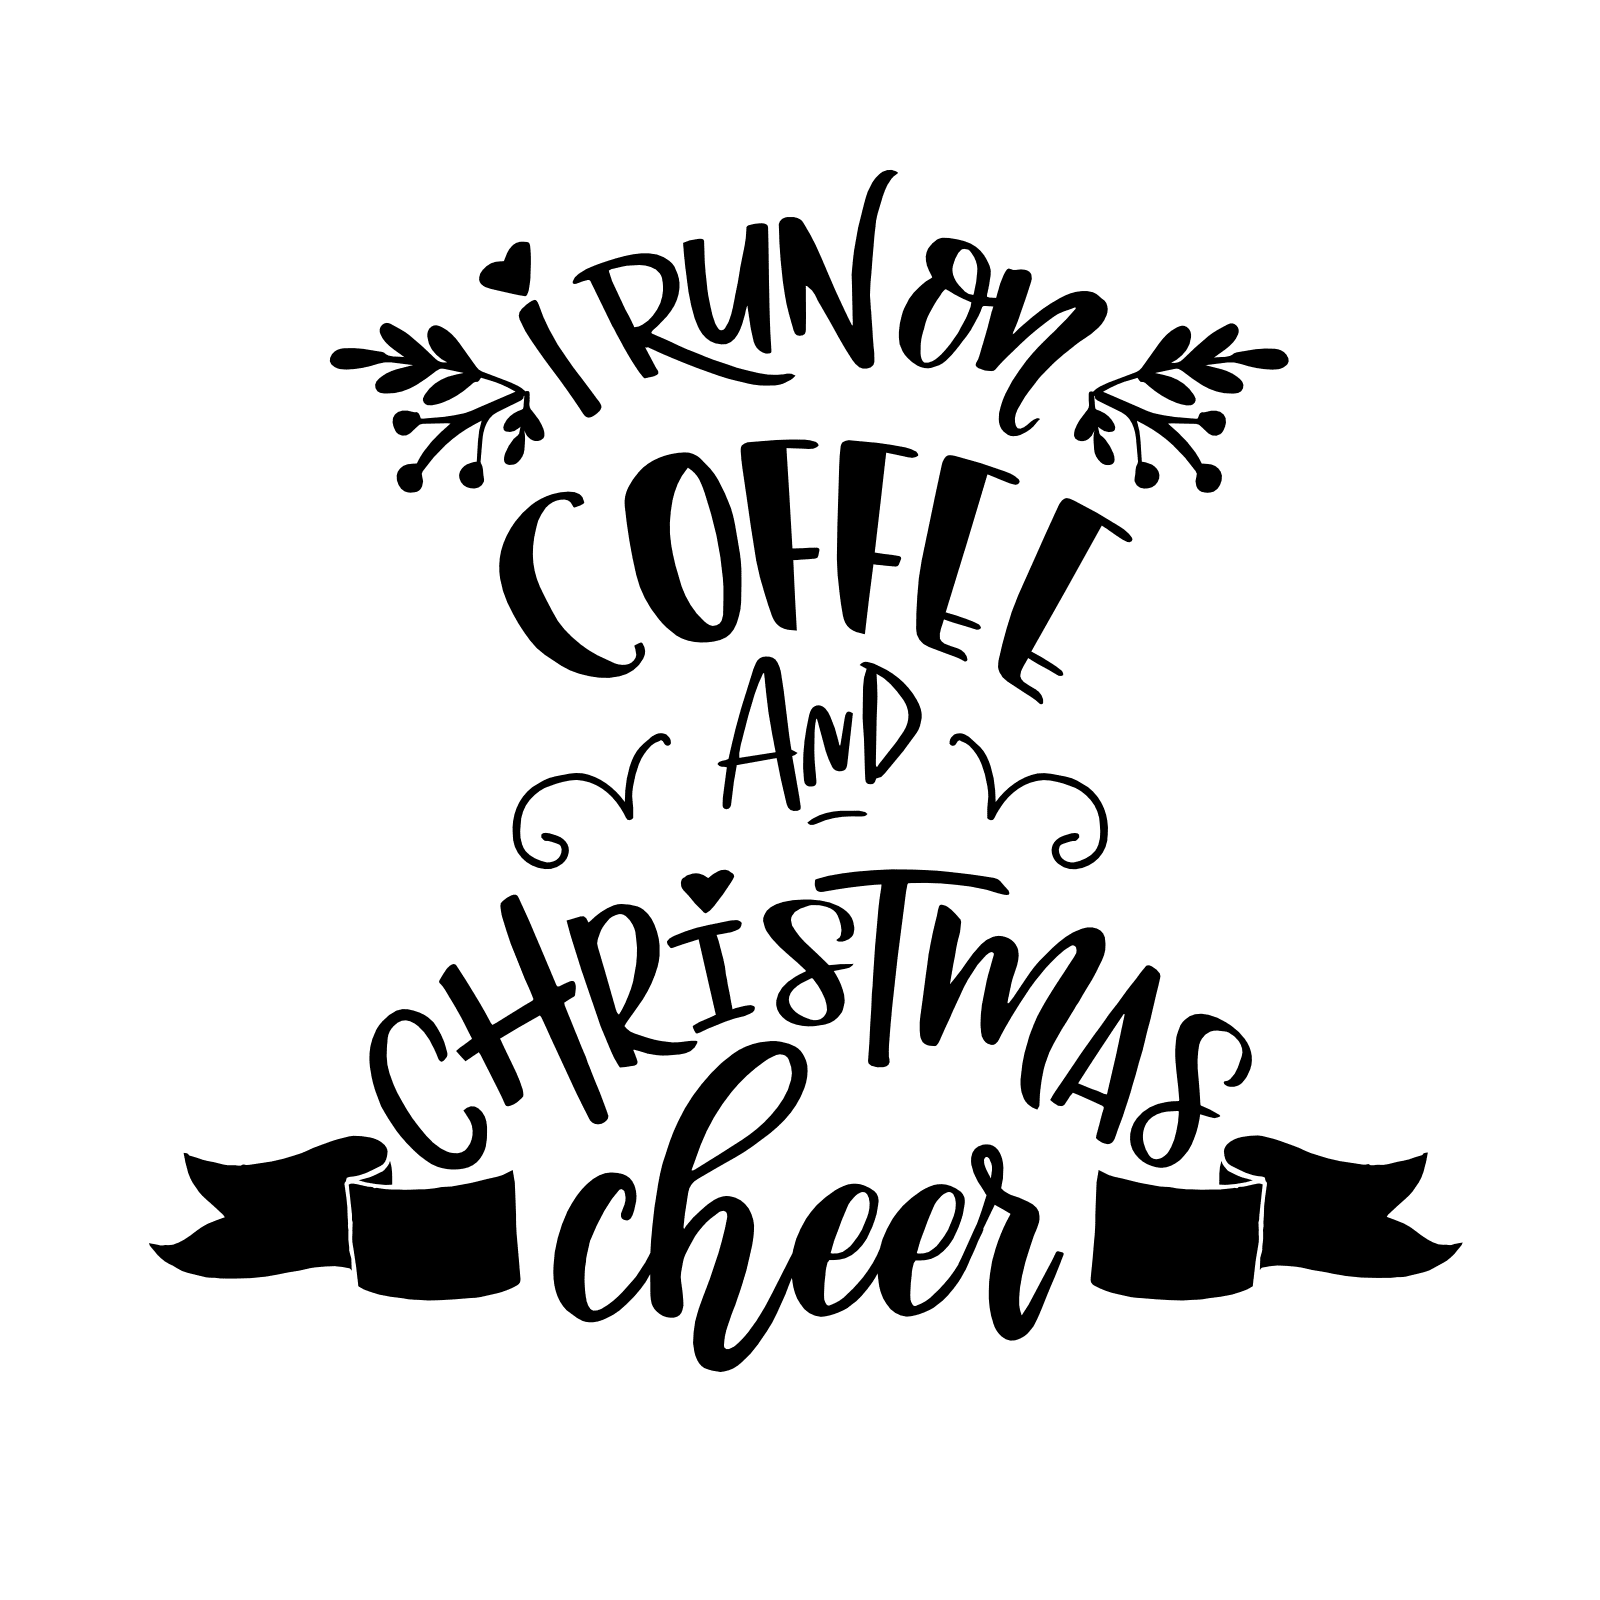 i-run-on-coffee-and-christmas-cheer-funny-holiday-free-svg-file-SvgHeart.Com